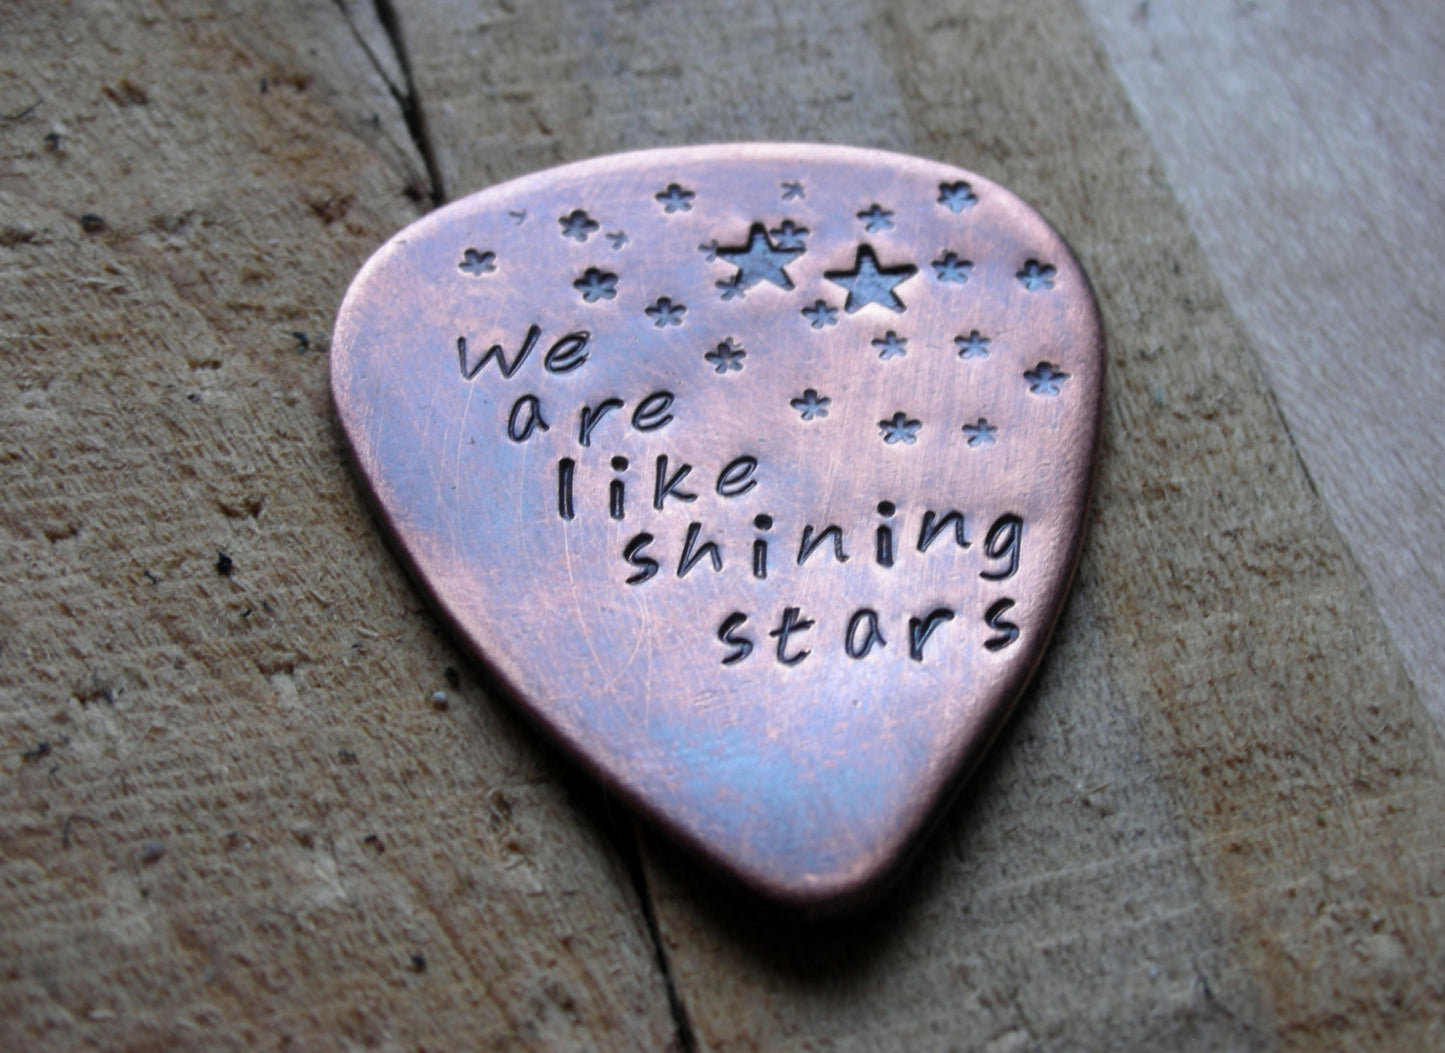 CUSTOM  GUITAR Pick-Shining Stars-Handstamped Copper-Great Gift for Fathers Day, Husband, Boyfriend, Dad, Groomsmen